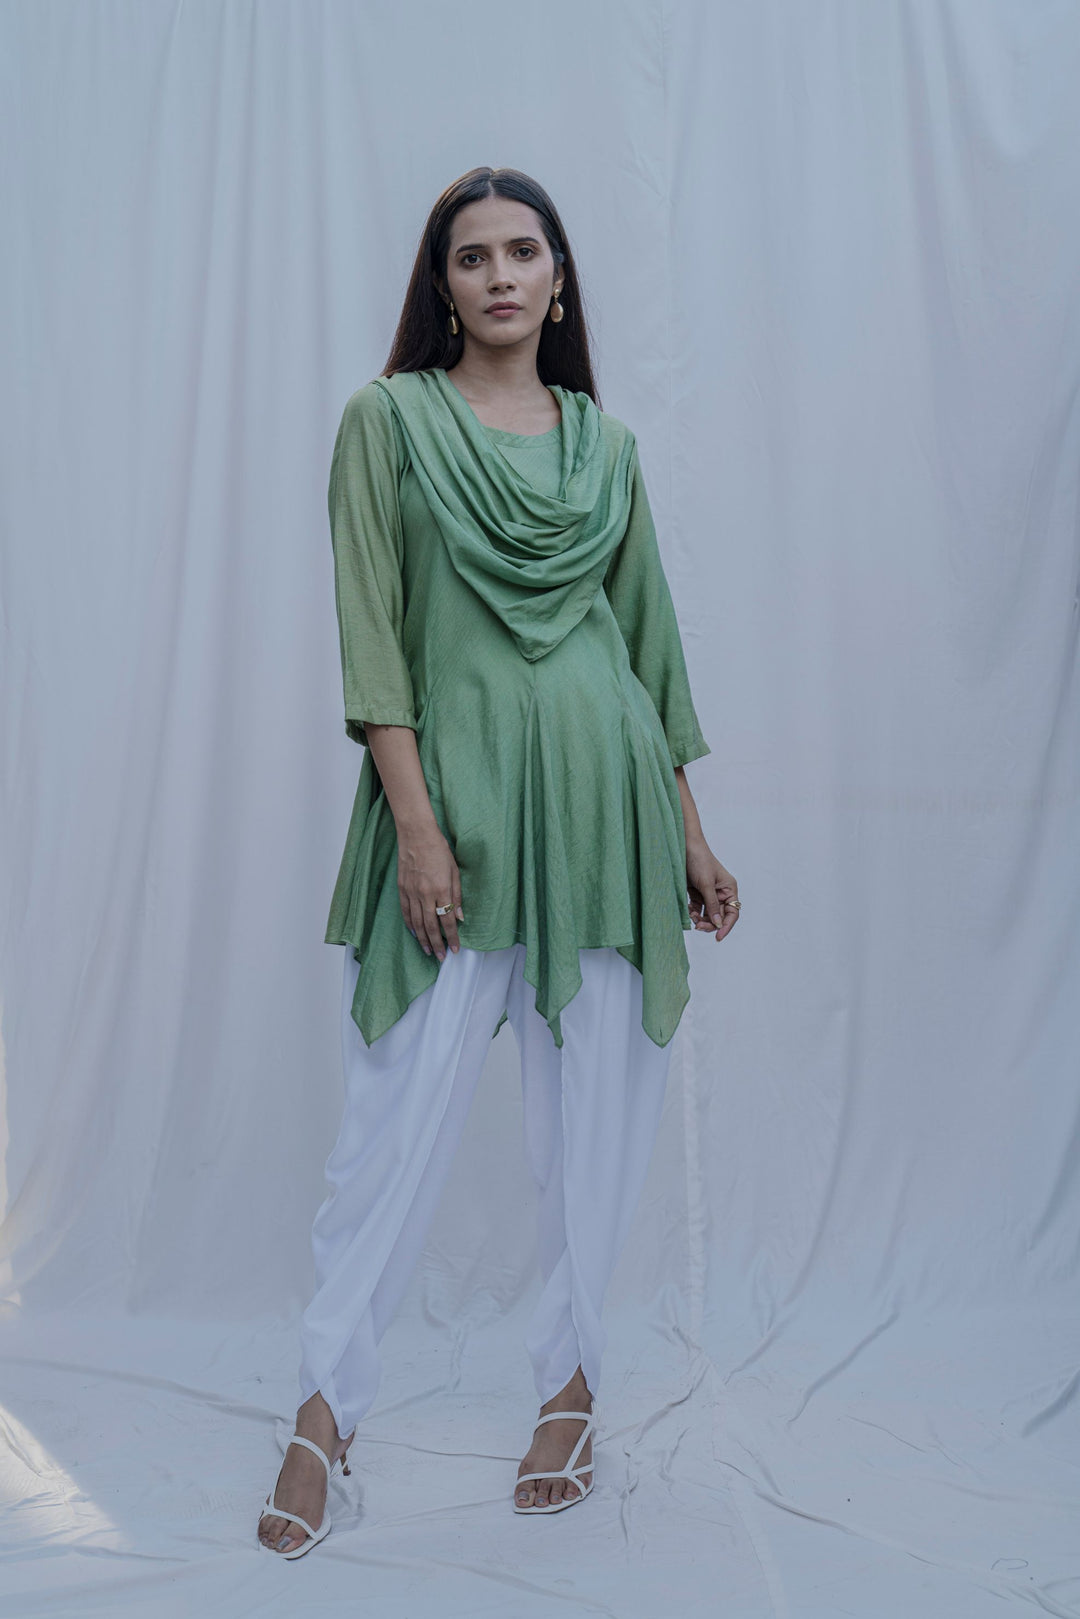 Dream Cowl Top in Light Green and Tulip Dhoti in White - Set